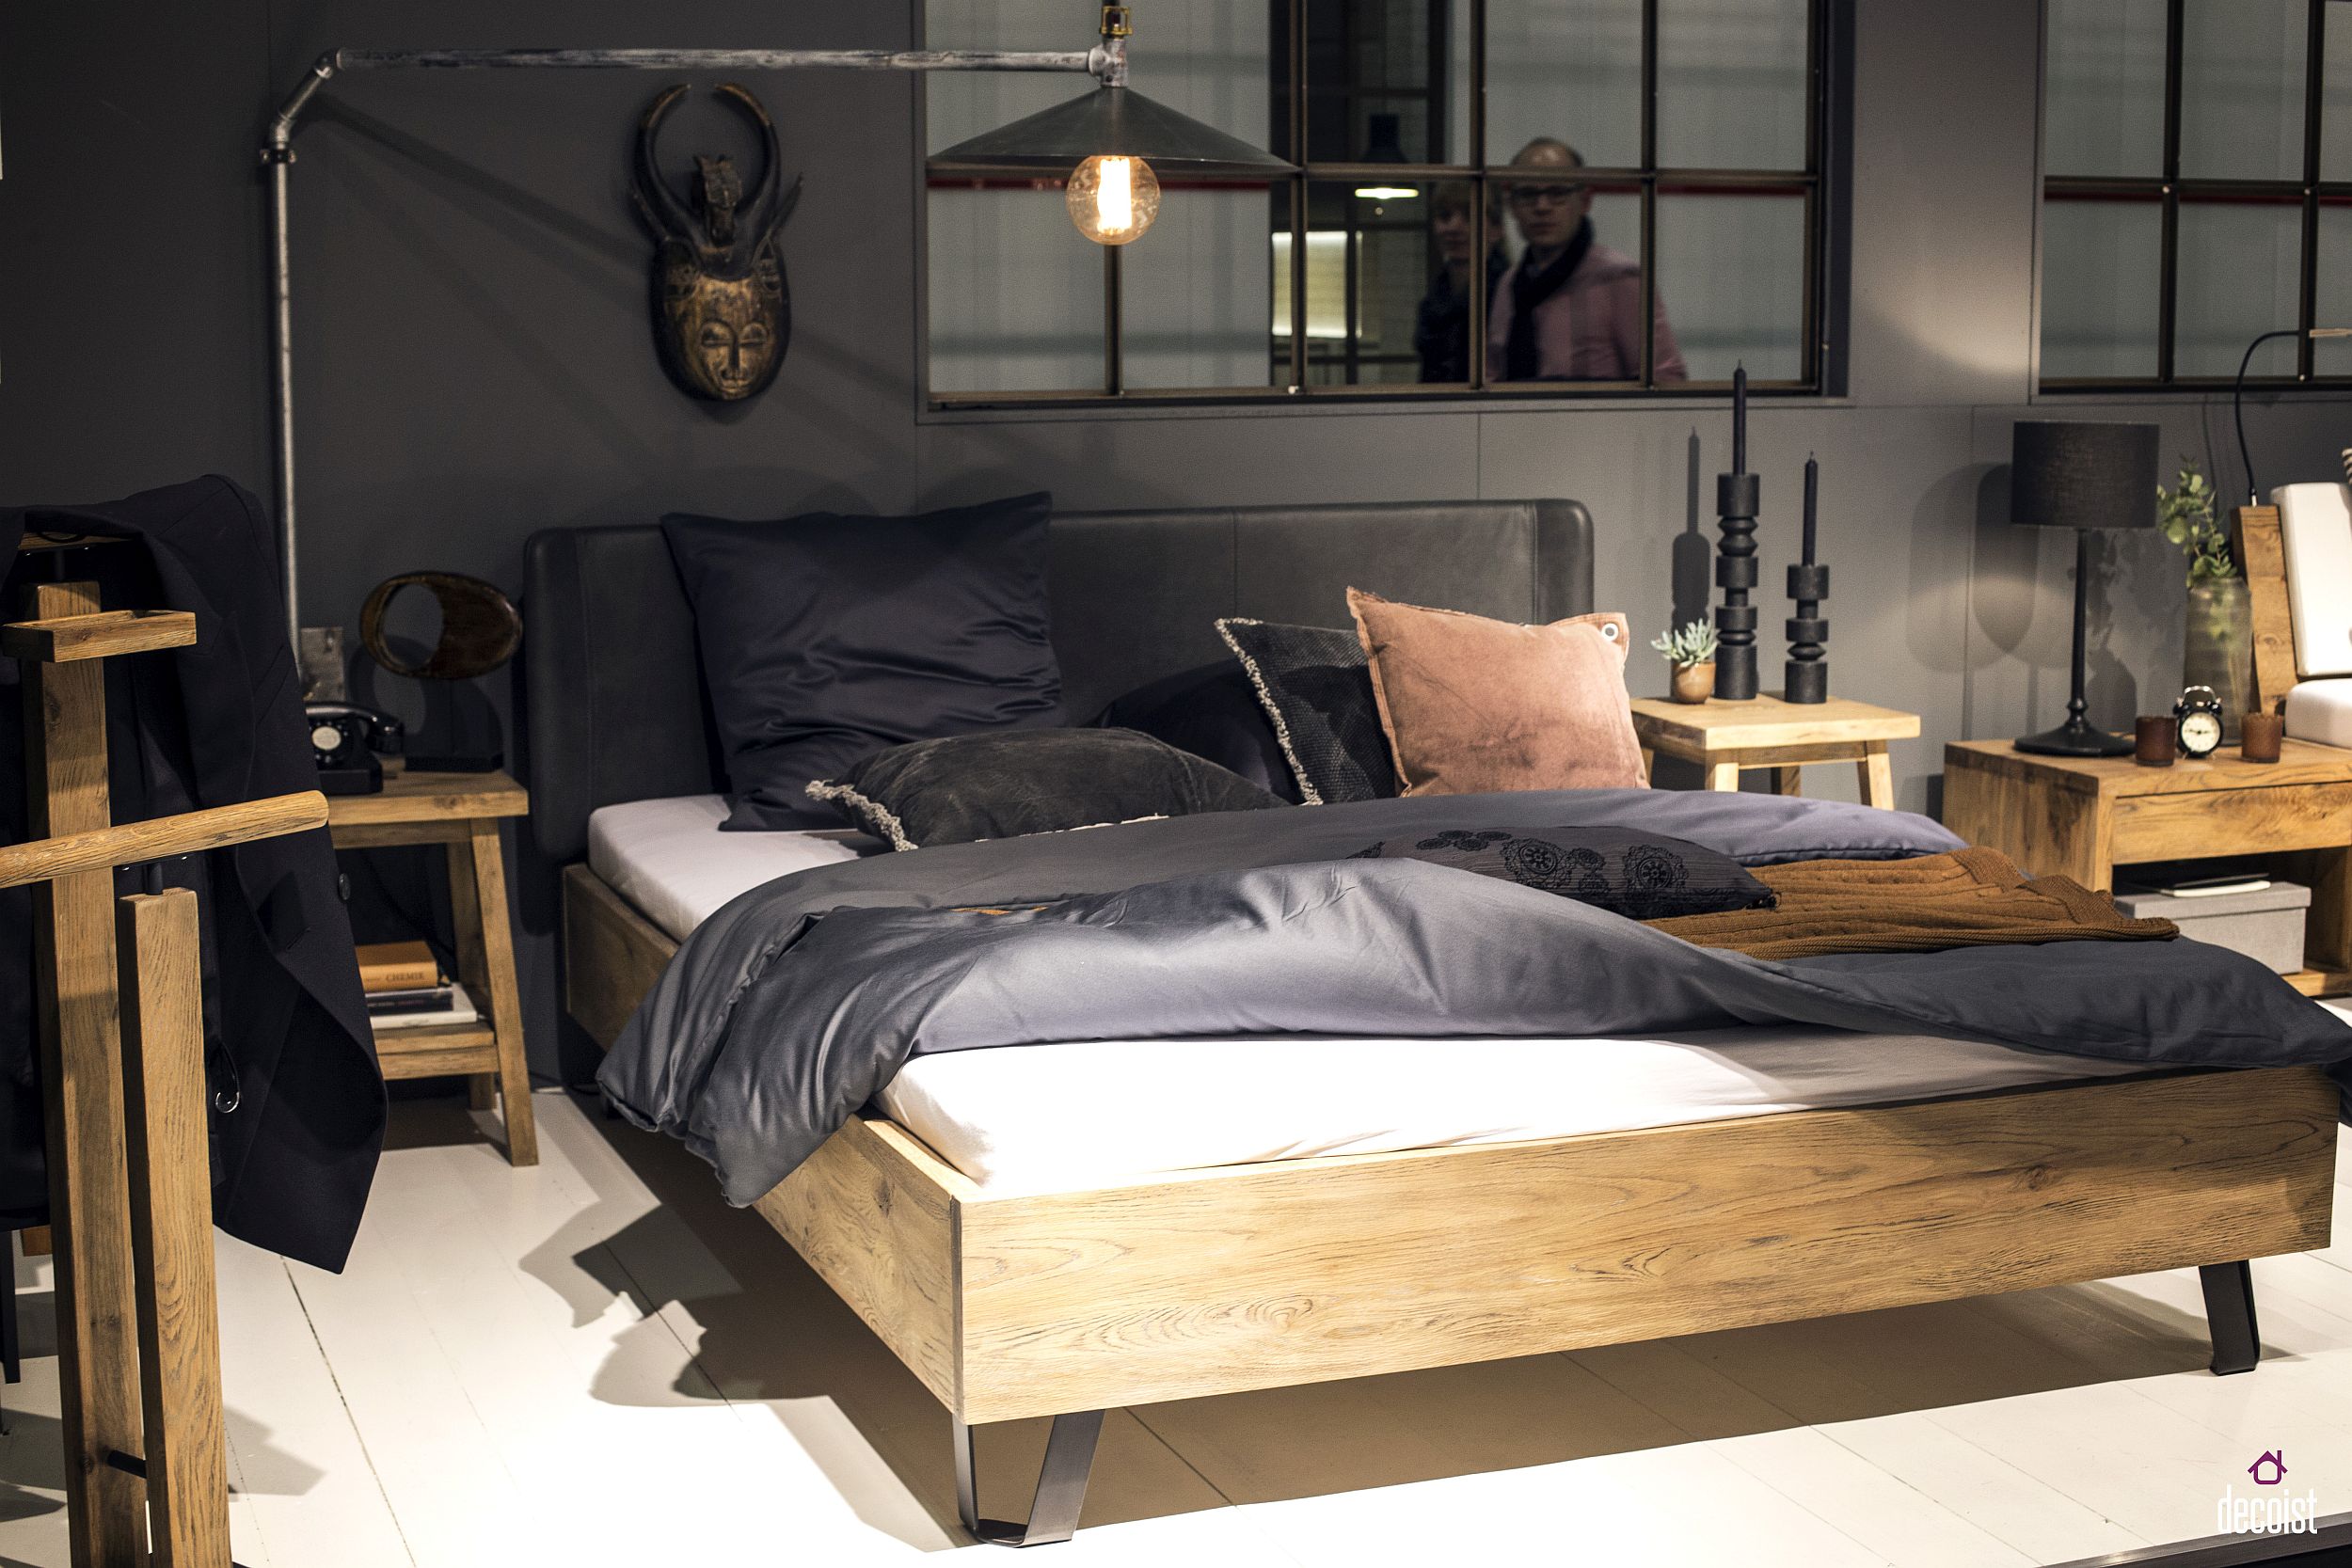 Ingenious-floor-lamp-next-to-bedroom-with-industrial-style-moves-away-from-the-mundane